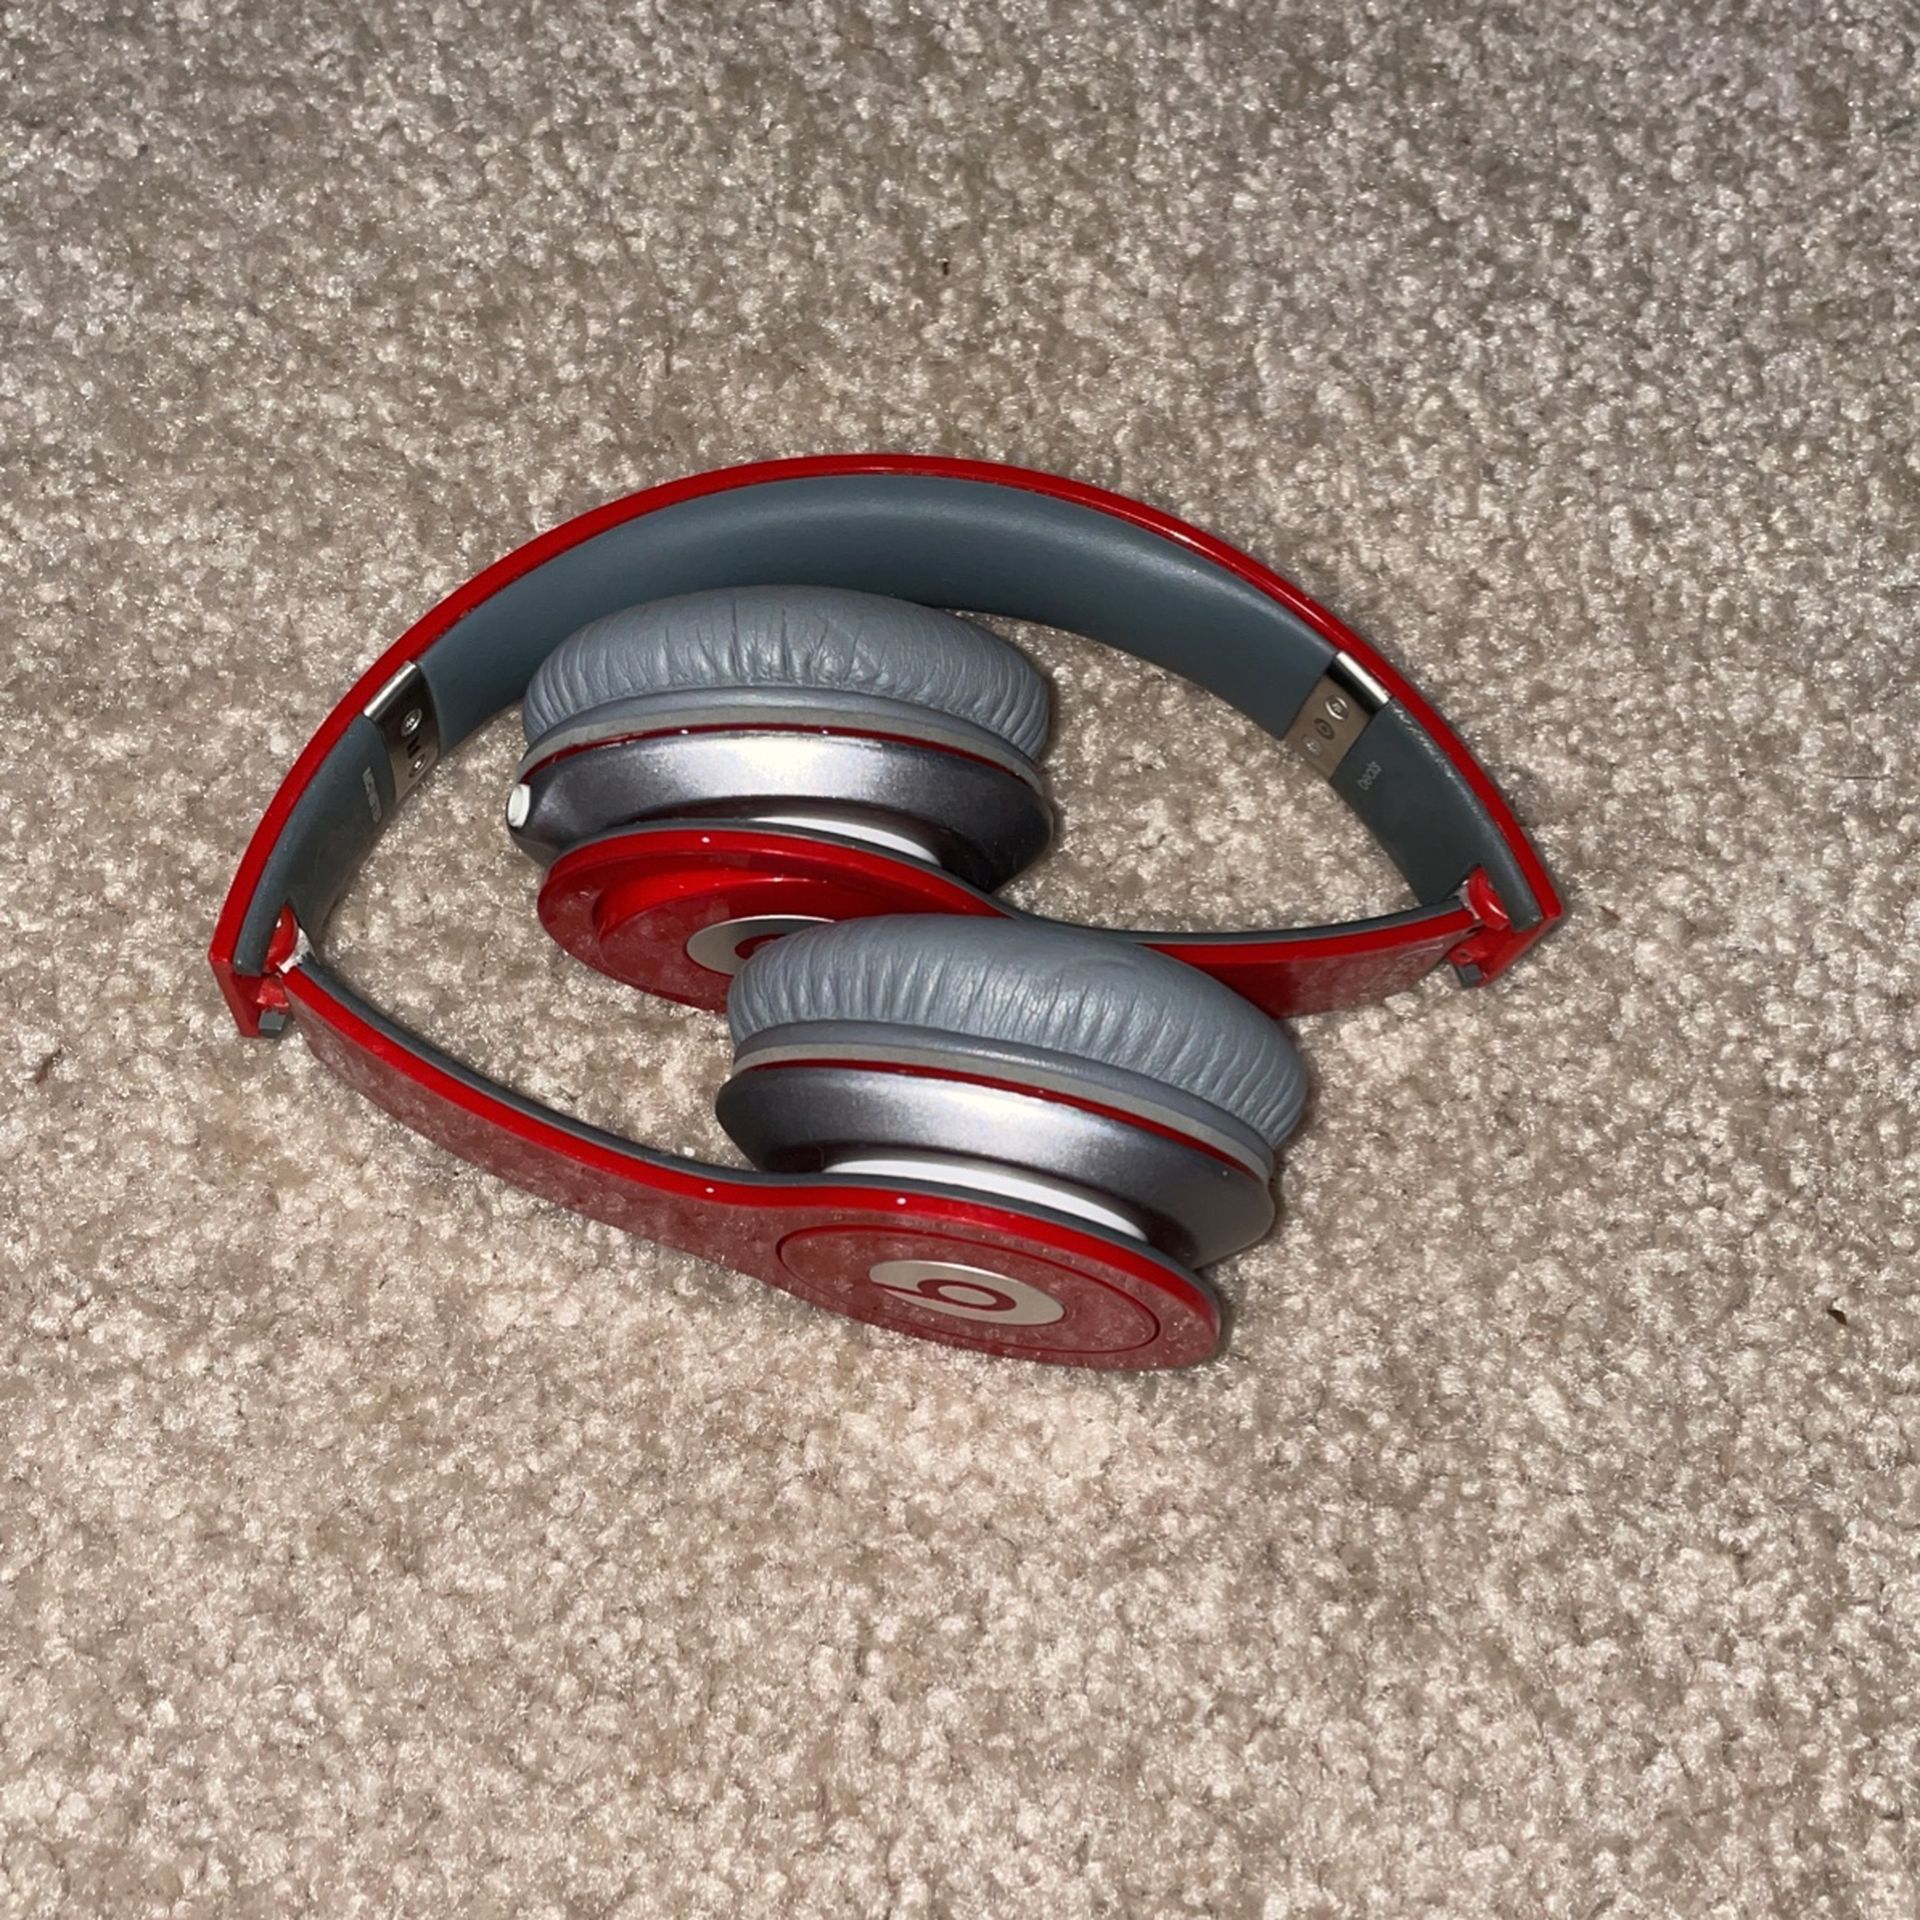 Cyberplads manuskript Mug Collectors Item: Solo HD Special Edition RED Beats By Dre for Sale in  Seattle, WA - OfferUp